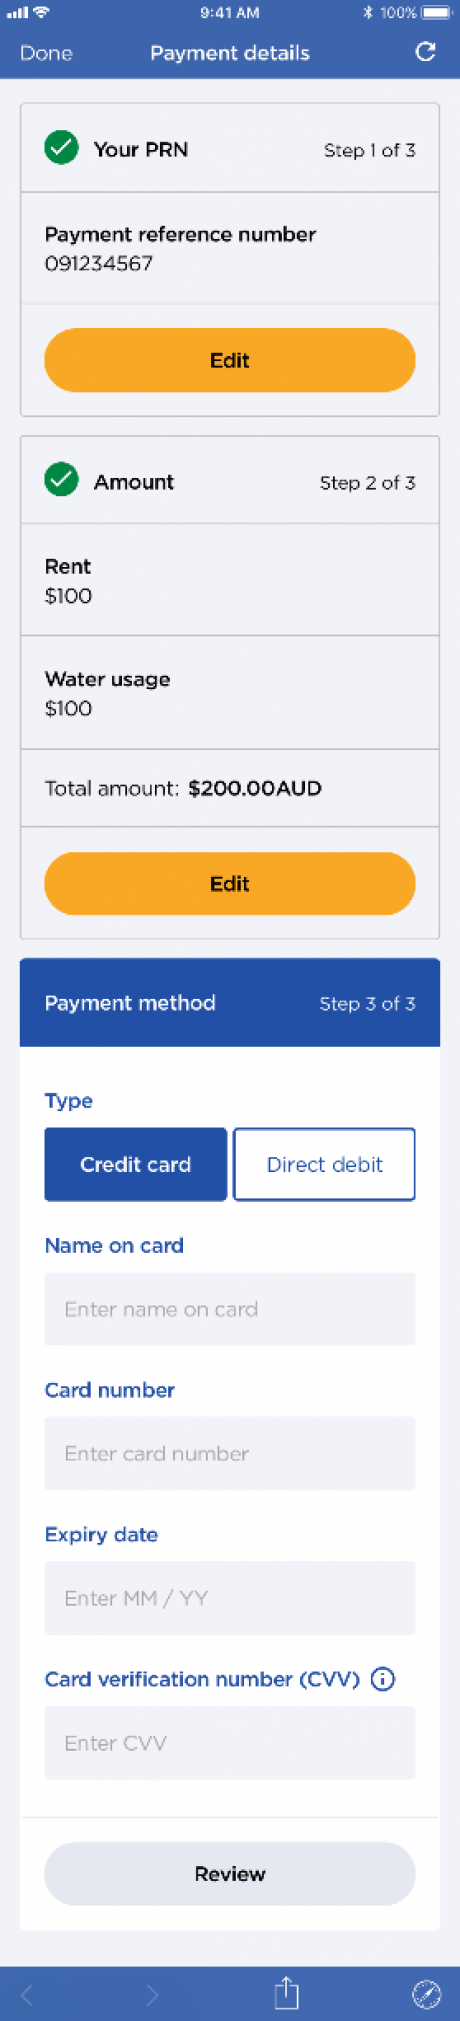 payment details full screen